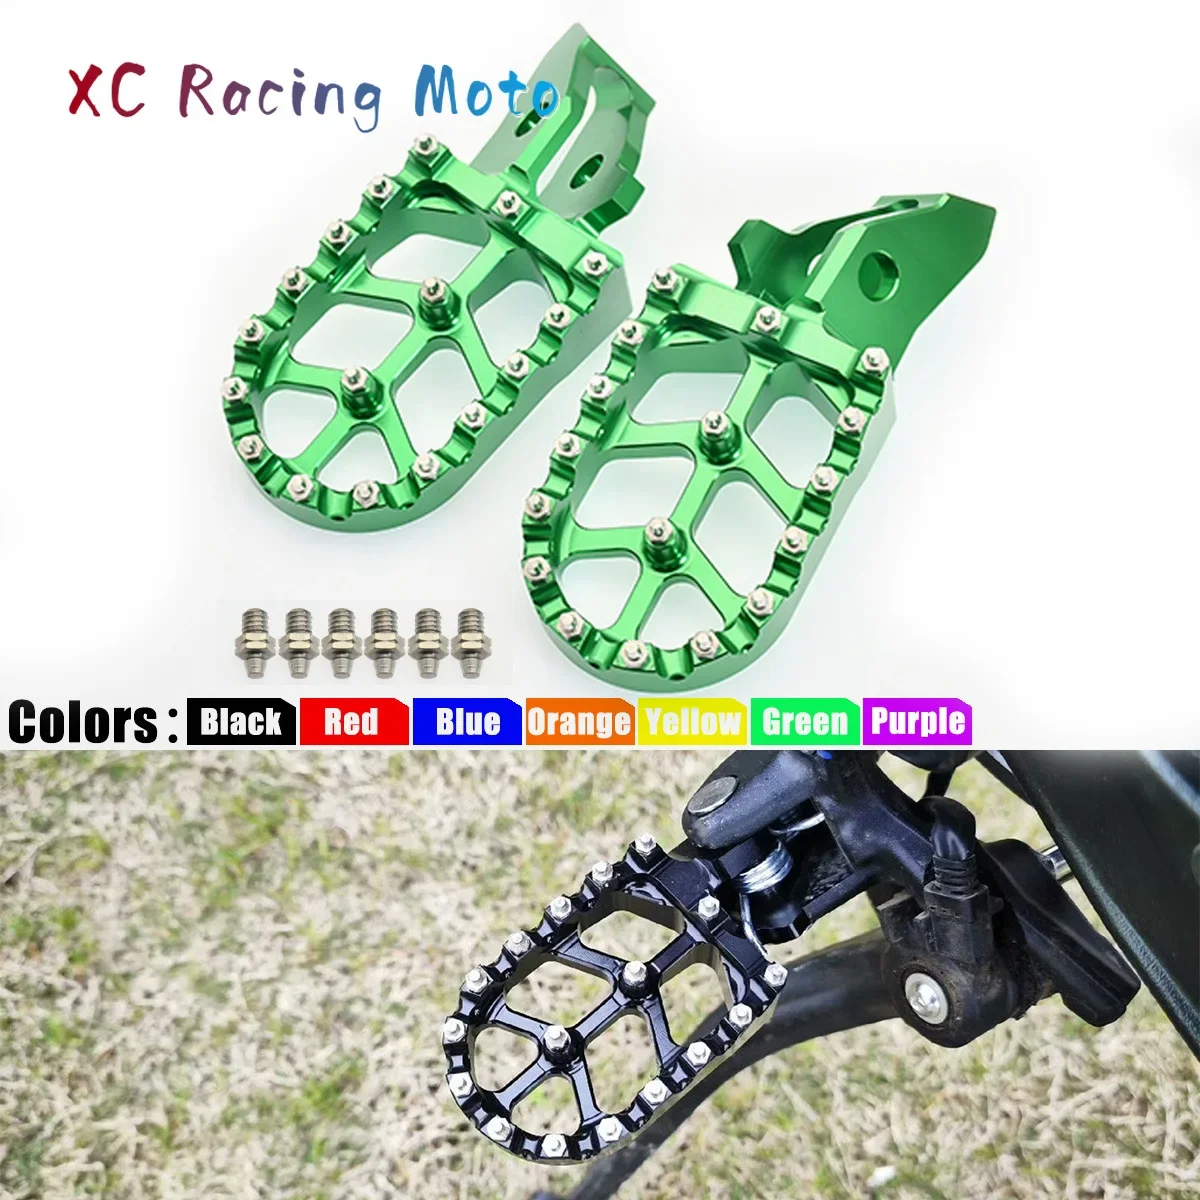 For SurRon Ultra Bee 2023 Electric Off-Road Vehicle Motorcycles Foot Pegs - $55.41